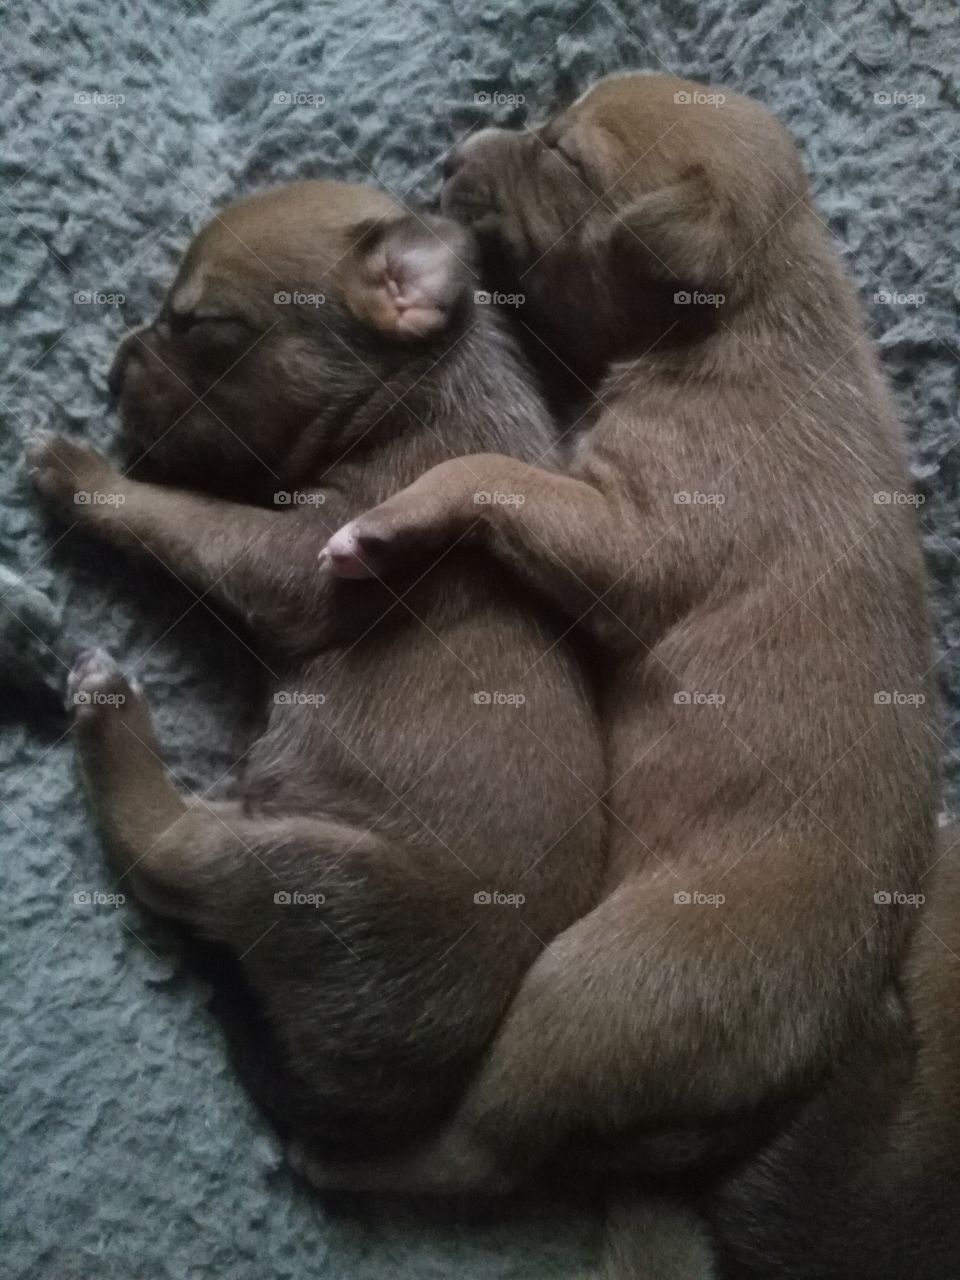 2 puppies sleeping side by side